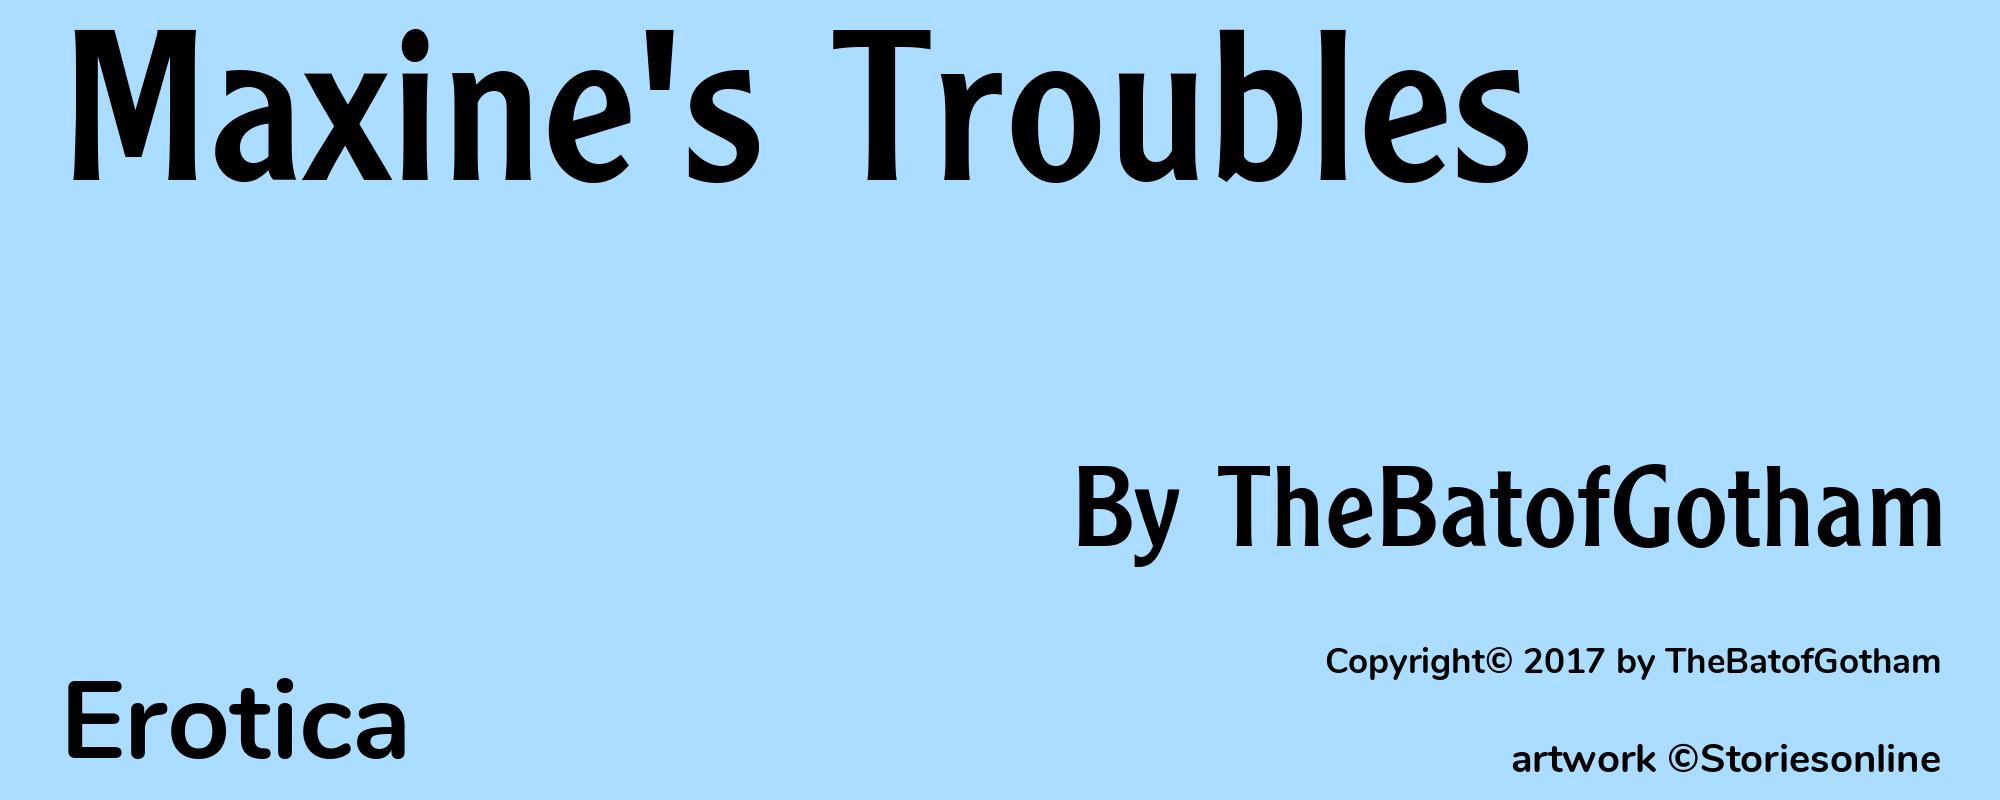 Maxine's Troubles - Cover